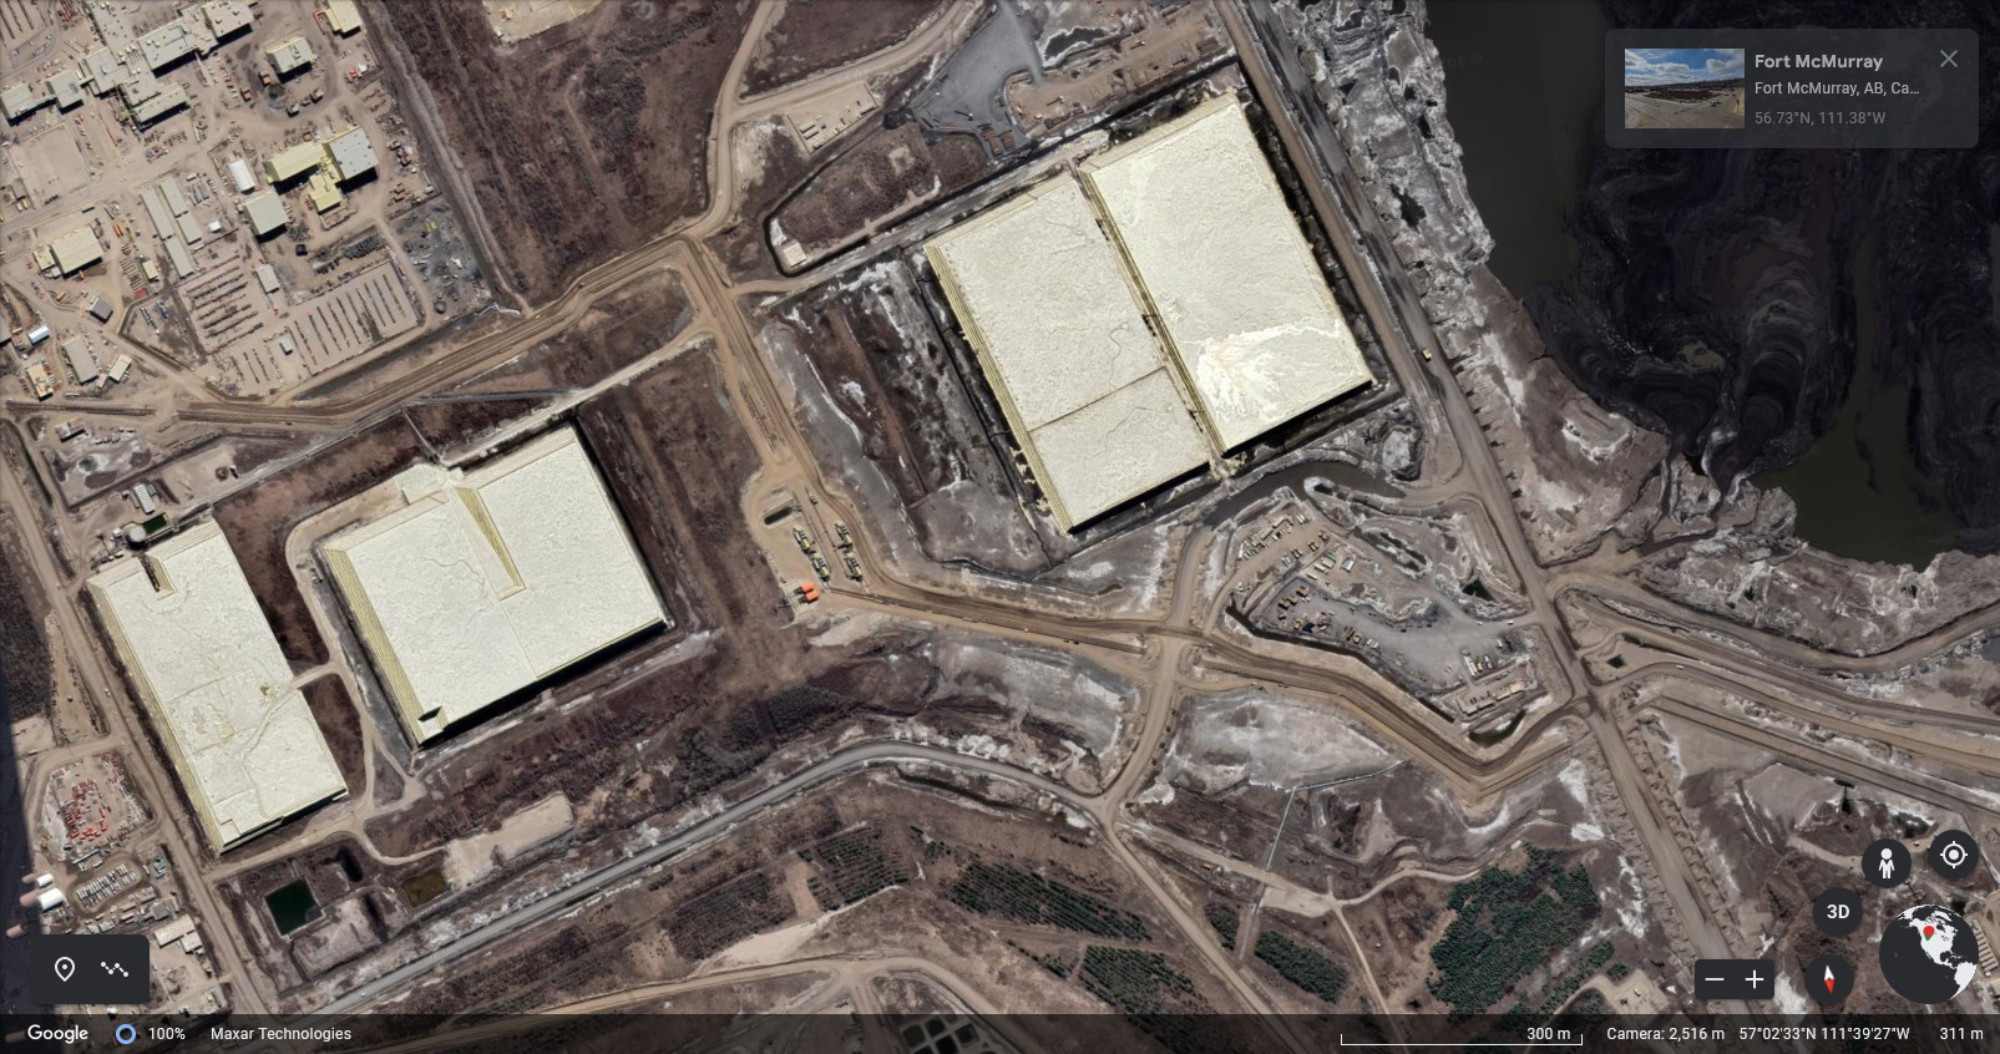 Satellite image of a tar sand mining facility, showing huge piles of sulfur